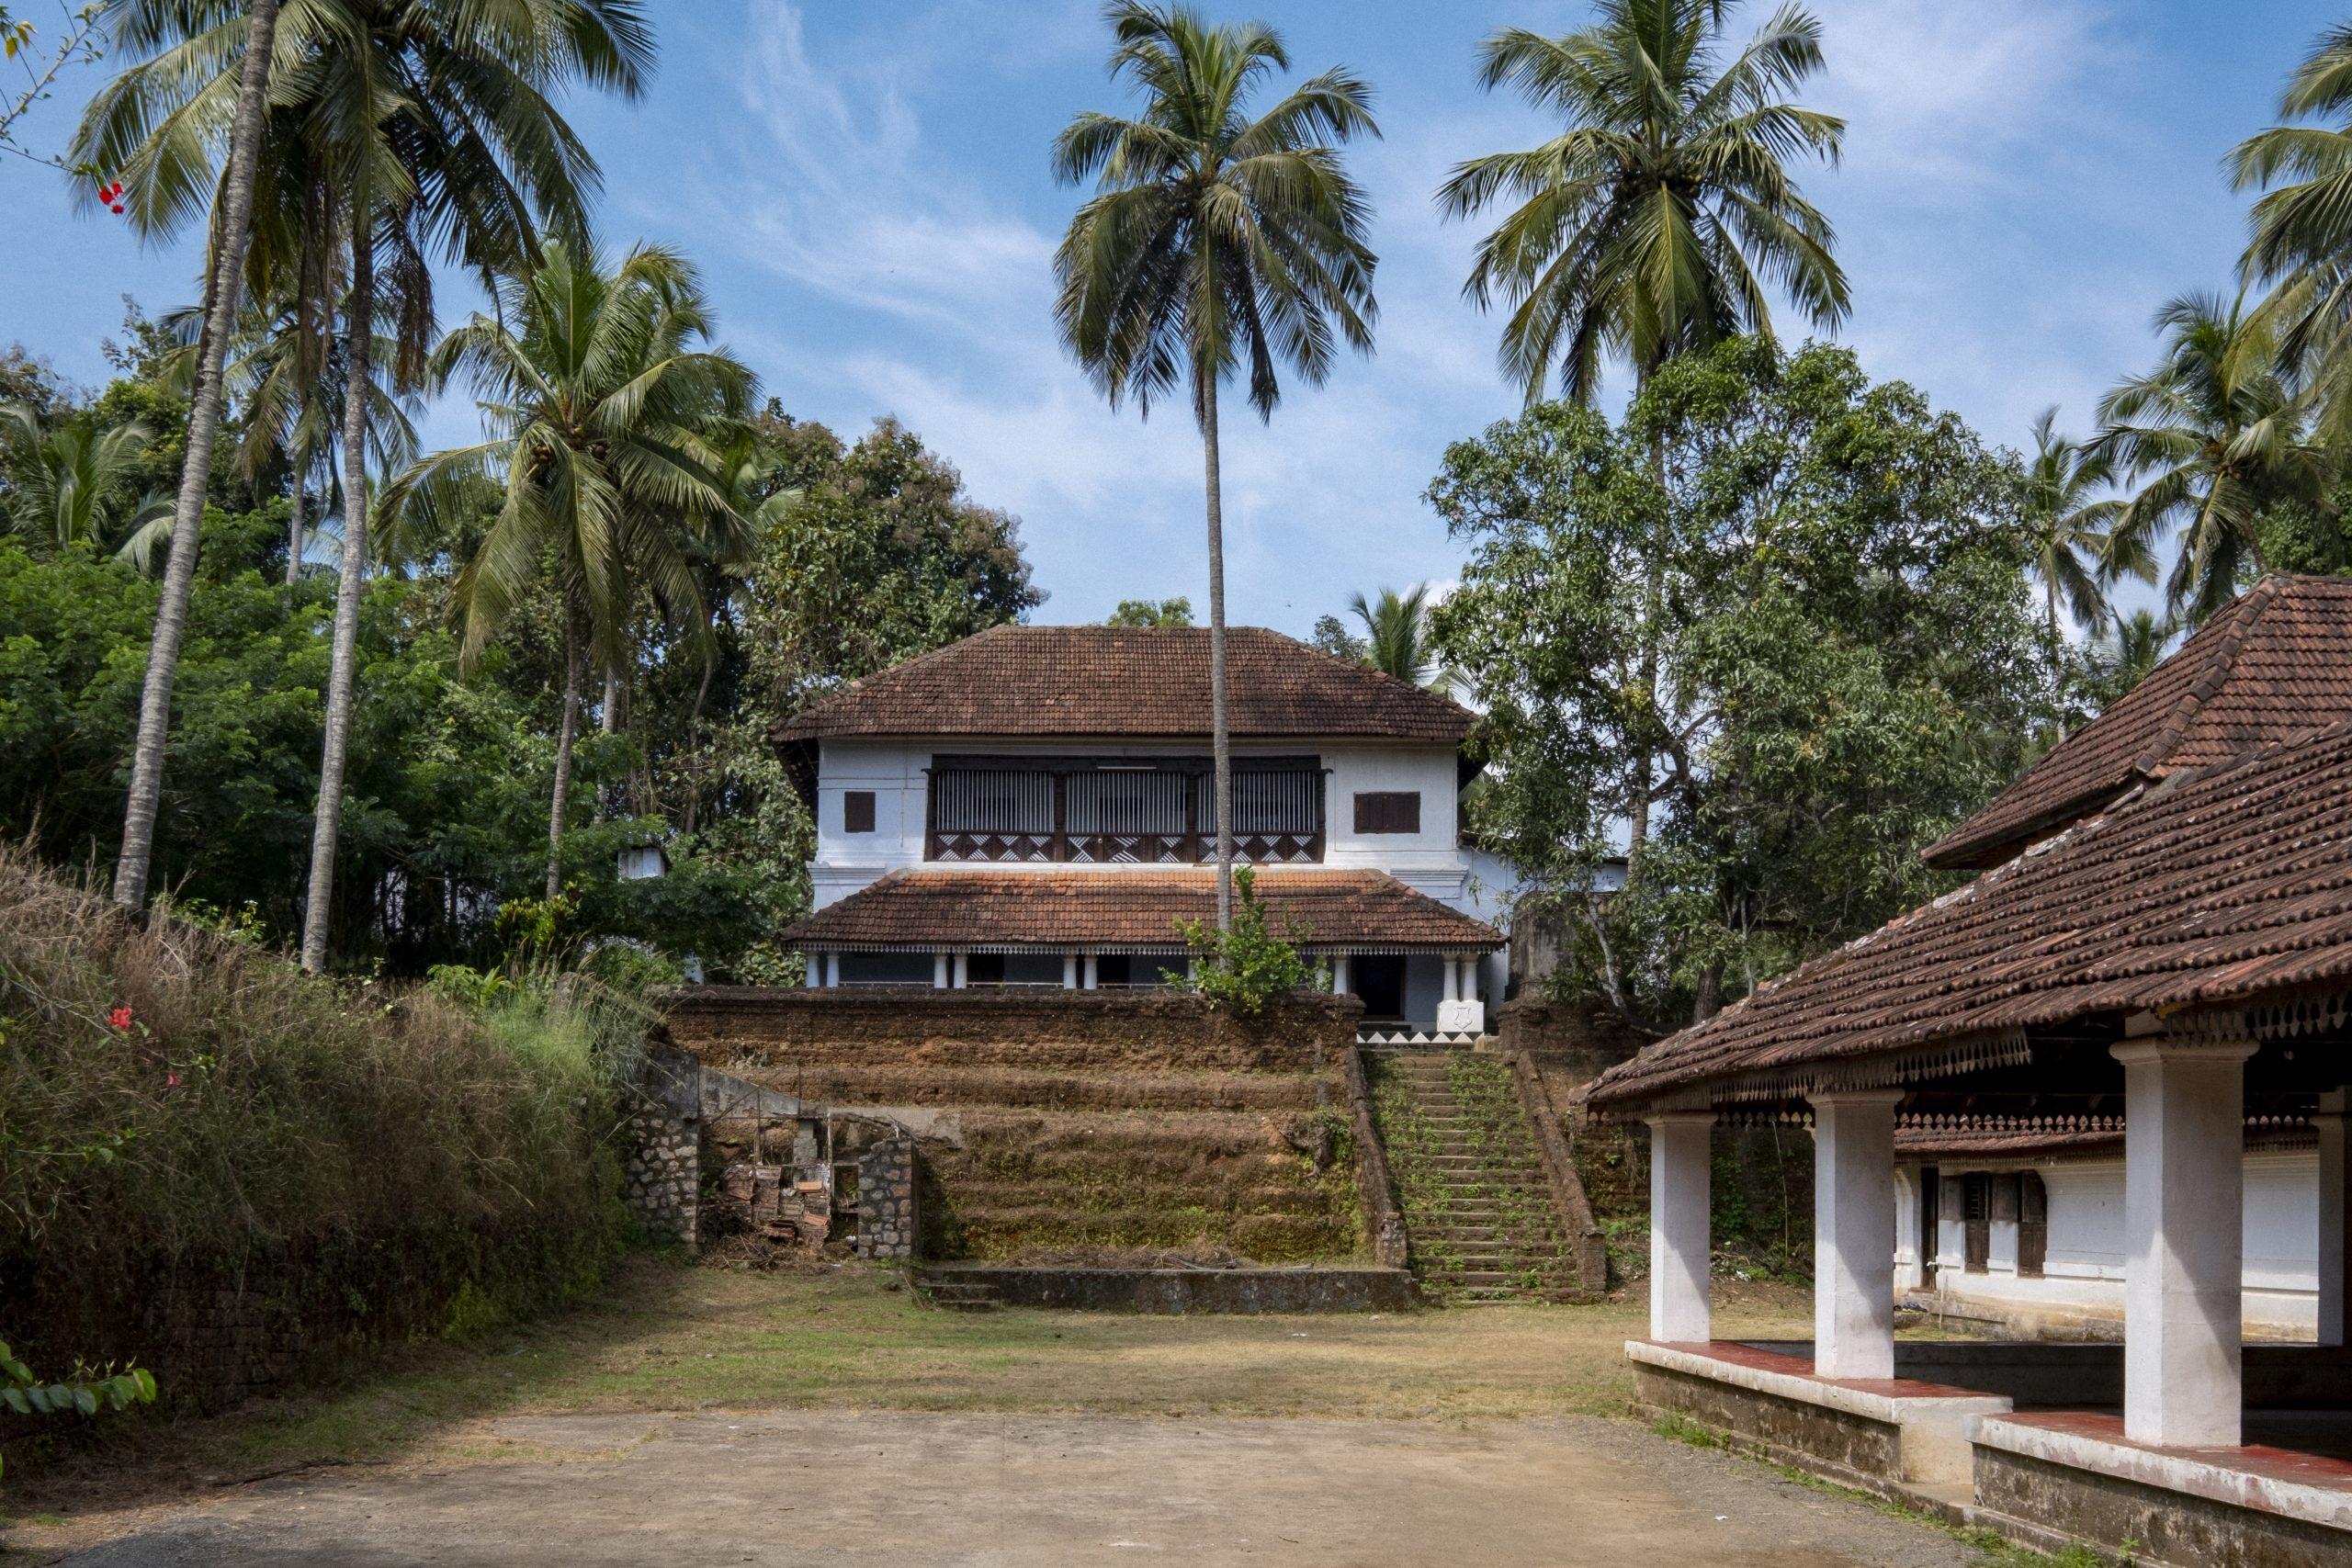 The Stately Home of the Olappamannas in Palakkad, Kerala